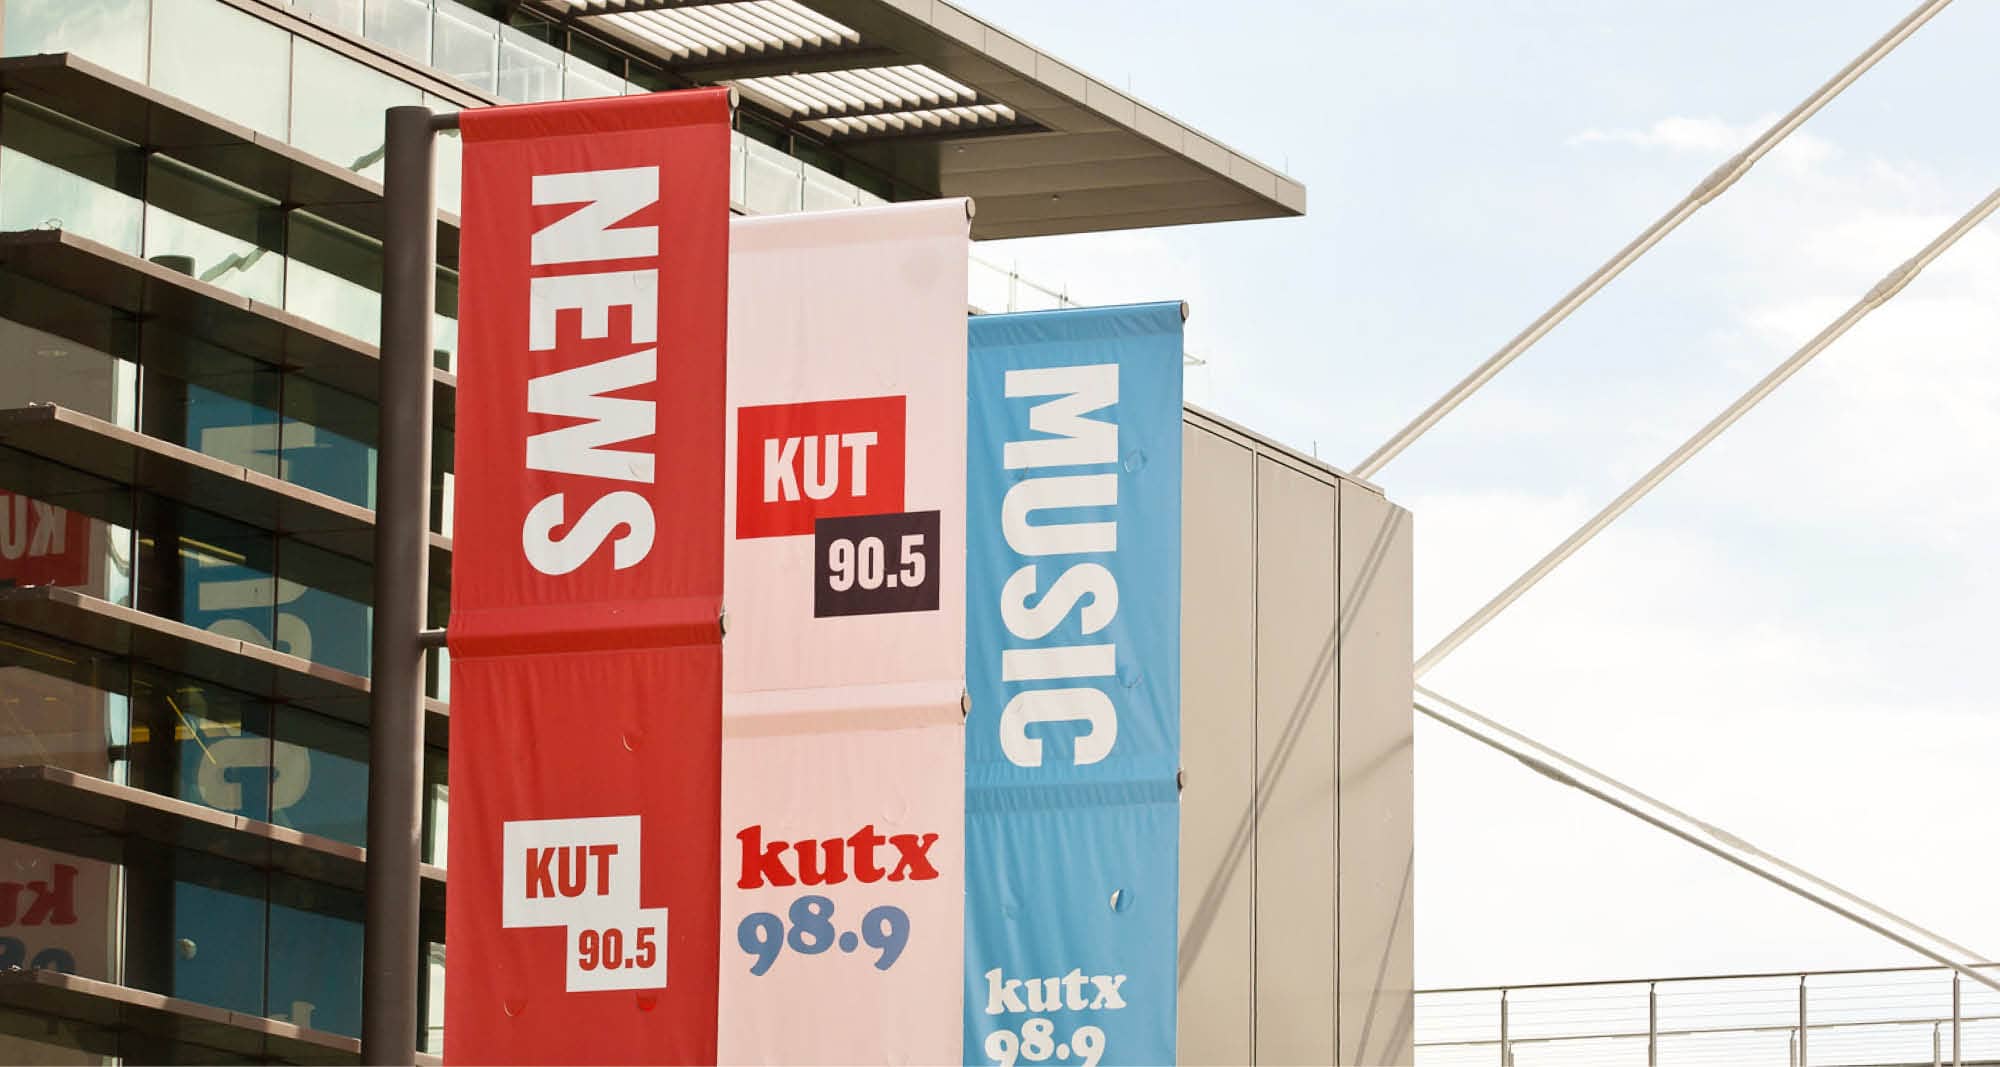 KUT 90.5 and kutx 98.9 banners on the side of a building